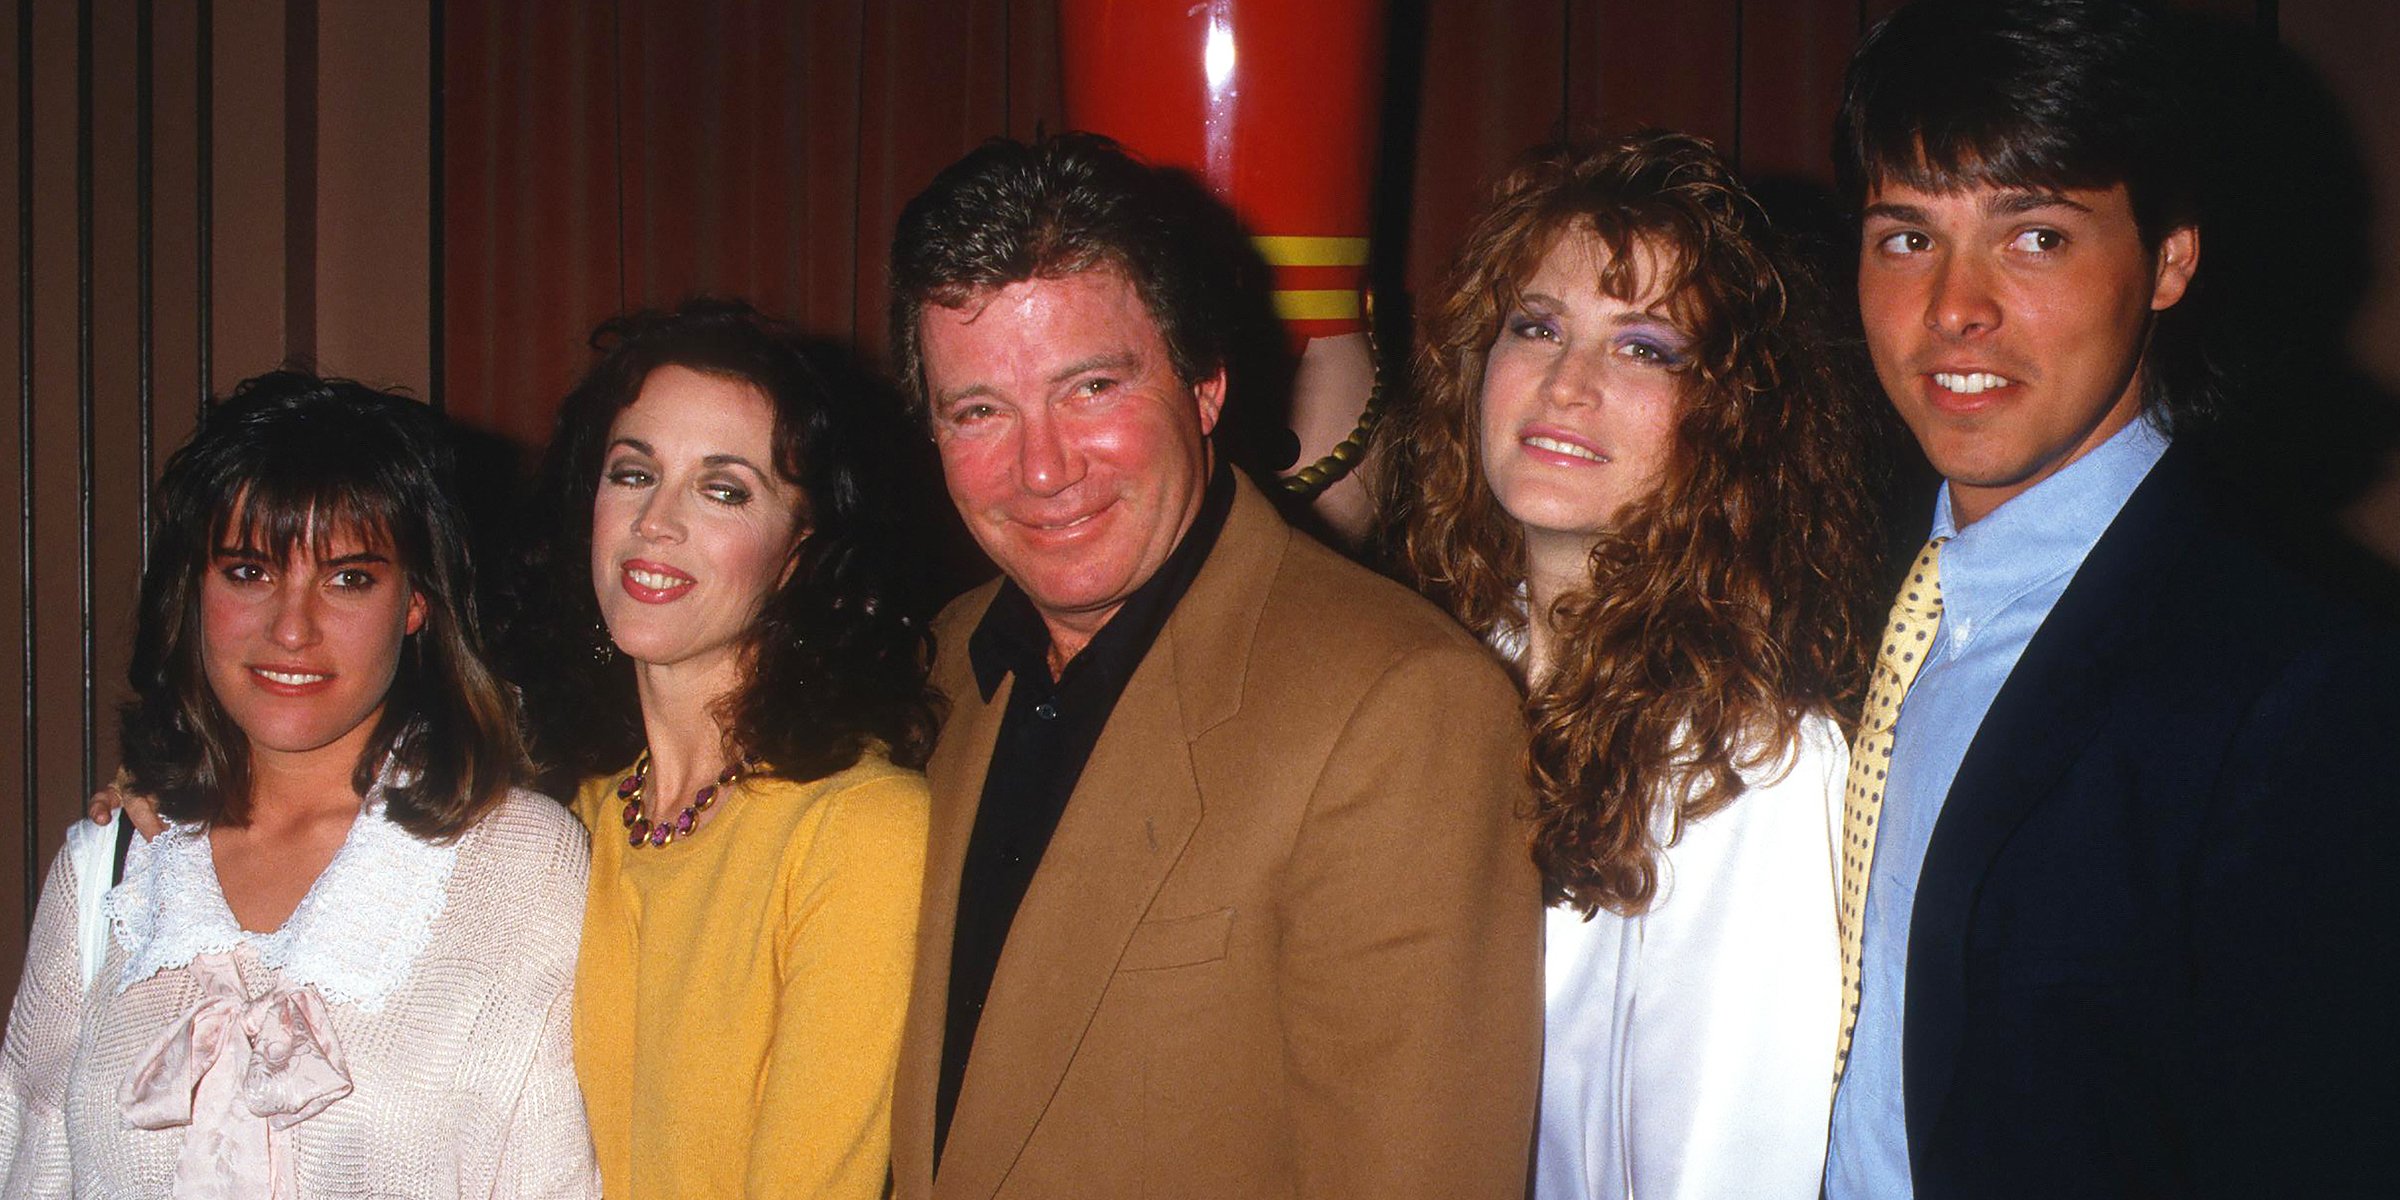 William Shatner, Marcy Lafferty, His Two Daughters, and a Guest, 1987 | William Shatner and His Granddaughter, Willow, 2006 | Source: Getty Images